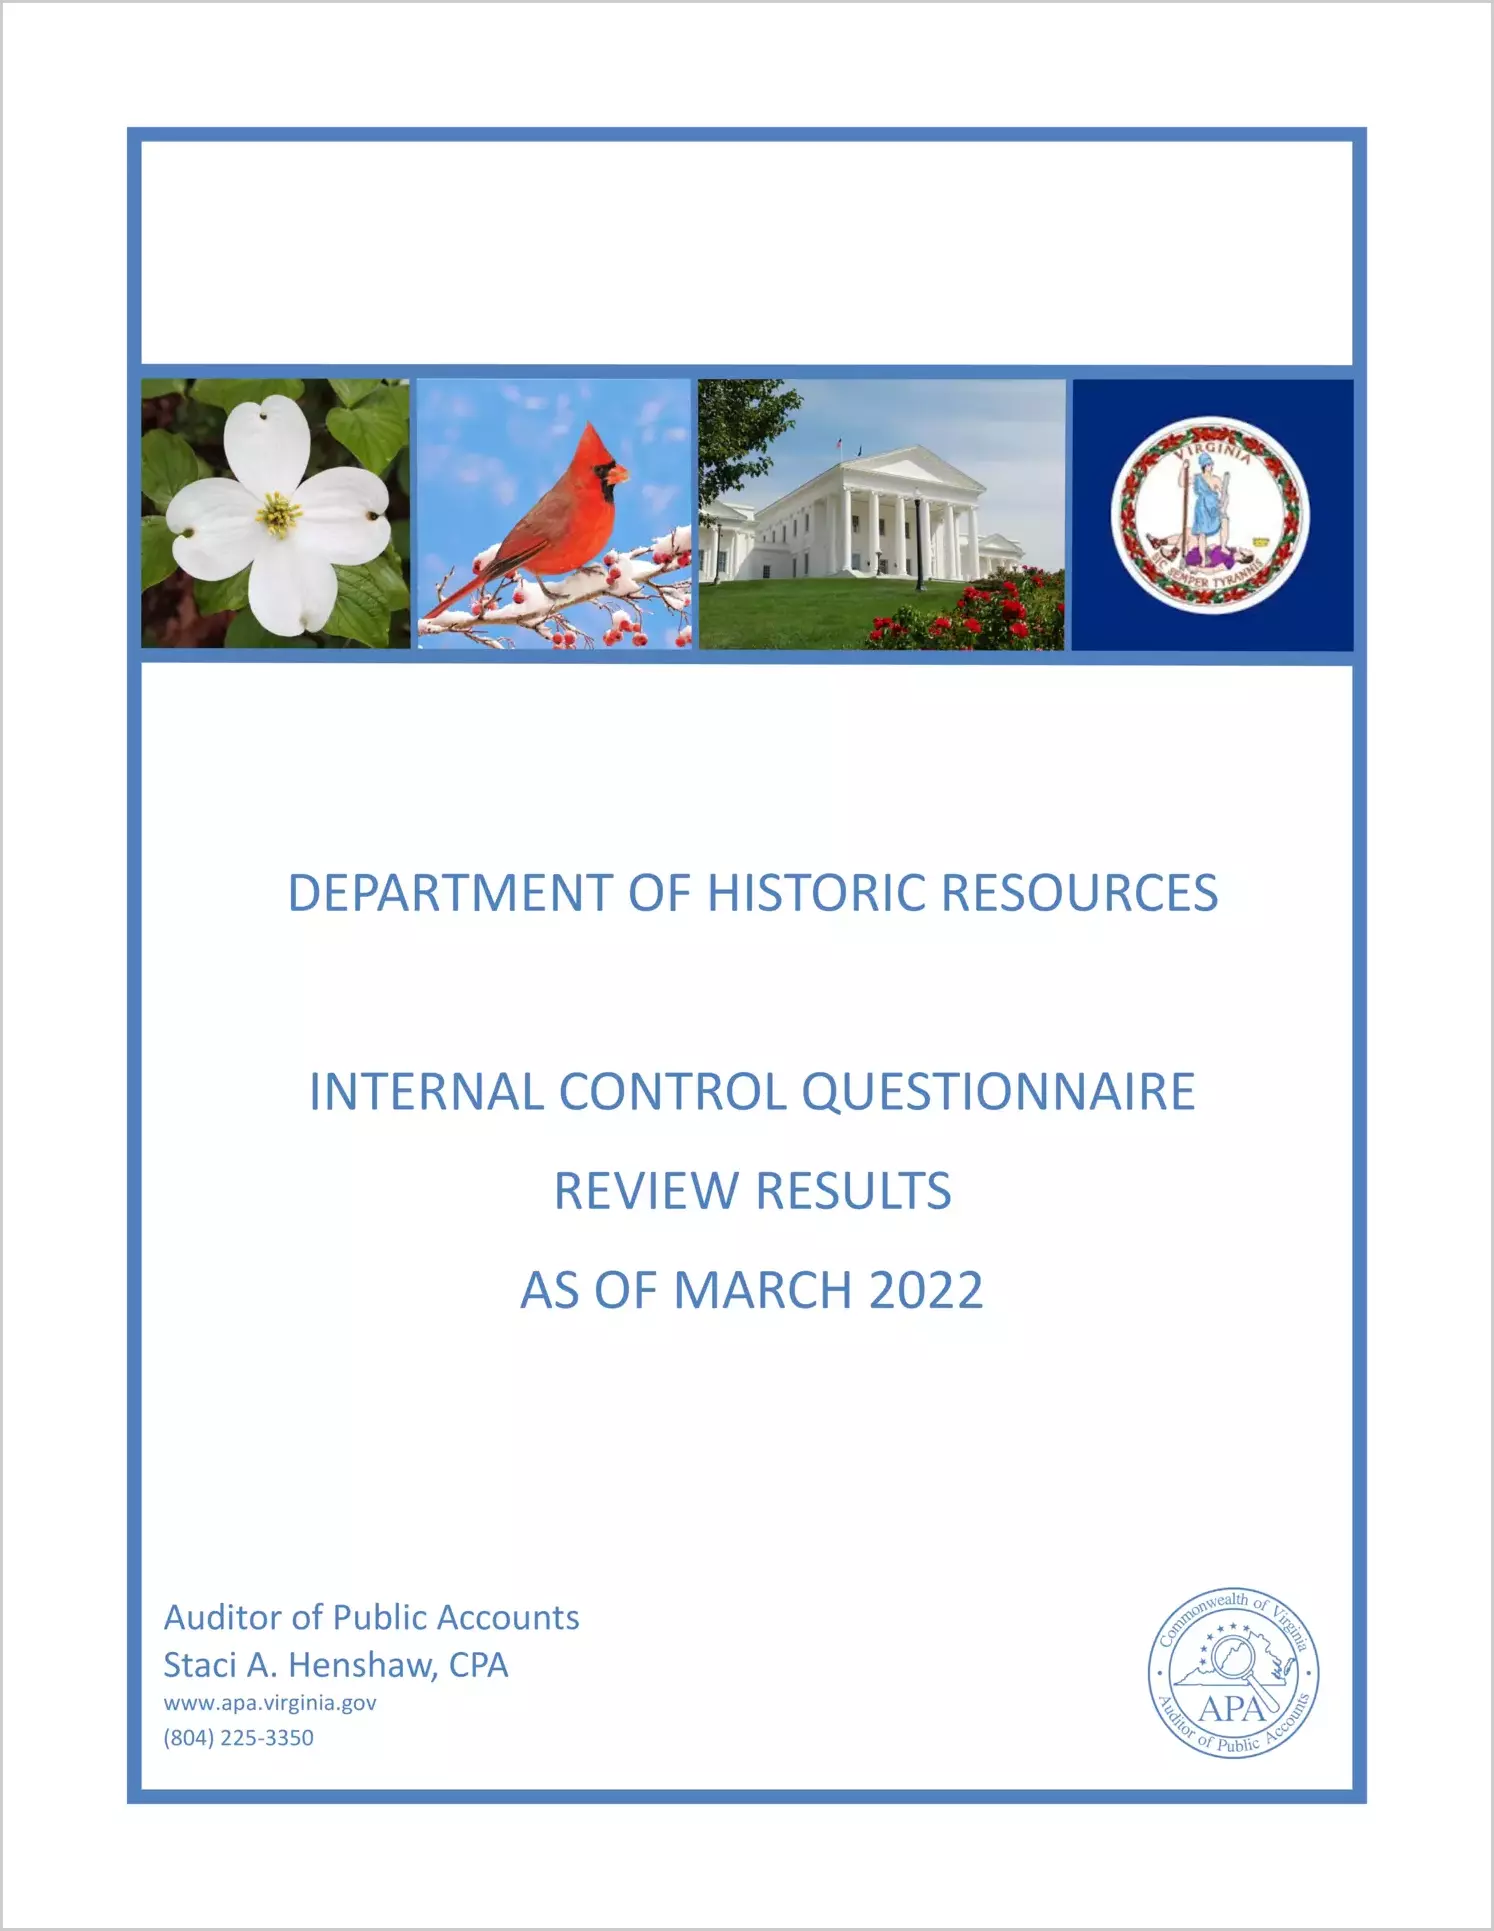 Department of Historic Resources Internal Control Questionnaire Review Results as of March 2022